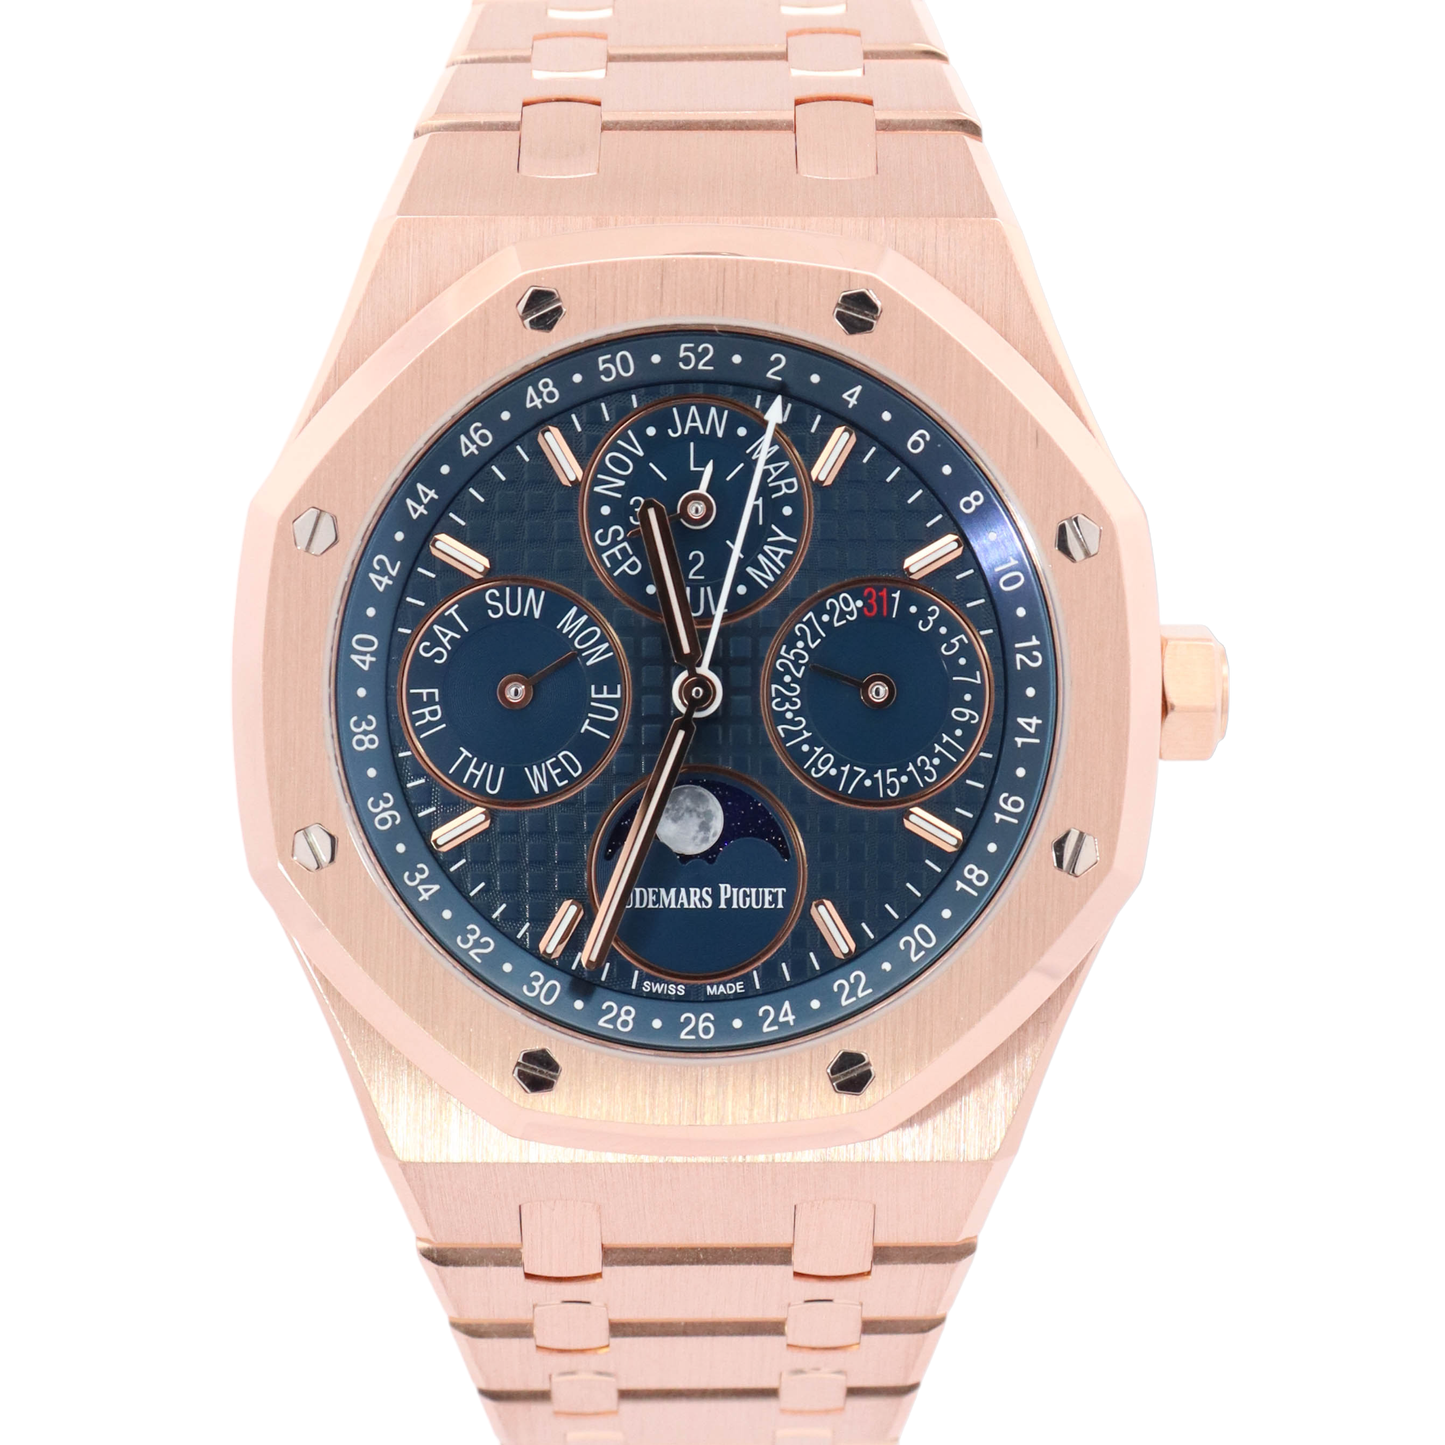 Audemars Piguet Royal Oak Perpetual Calendar 41mm Rose Gold Blue "Grande Tapisserie" Stick Dial Watch Reference# 26574OR.OO.1220OR.03 - Happy Jewelers Fine Jewelry Lifetime Warranty